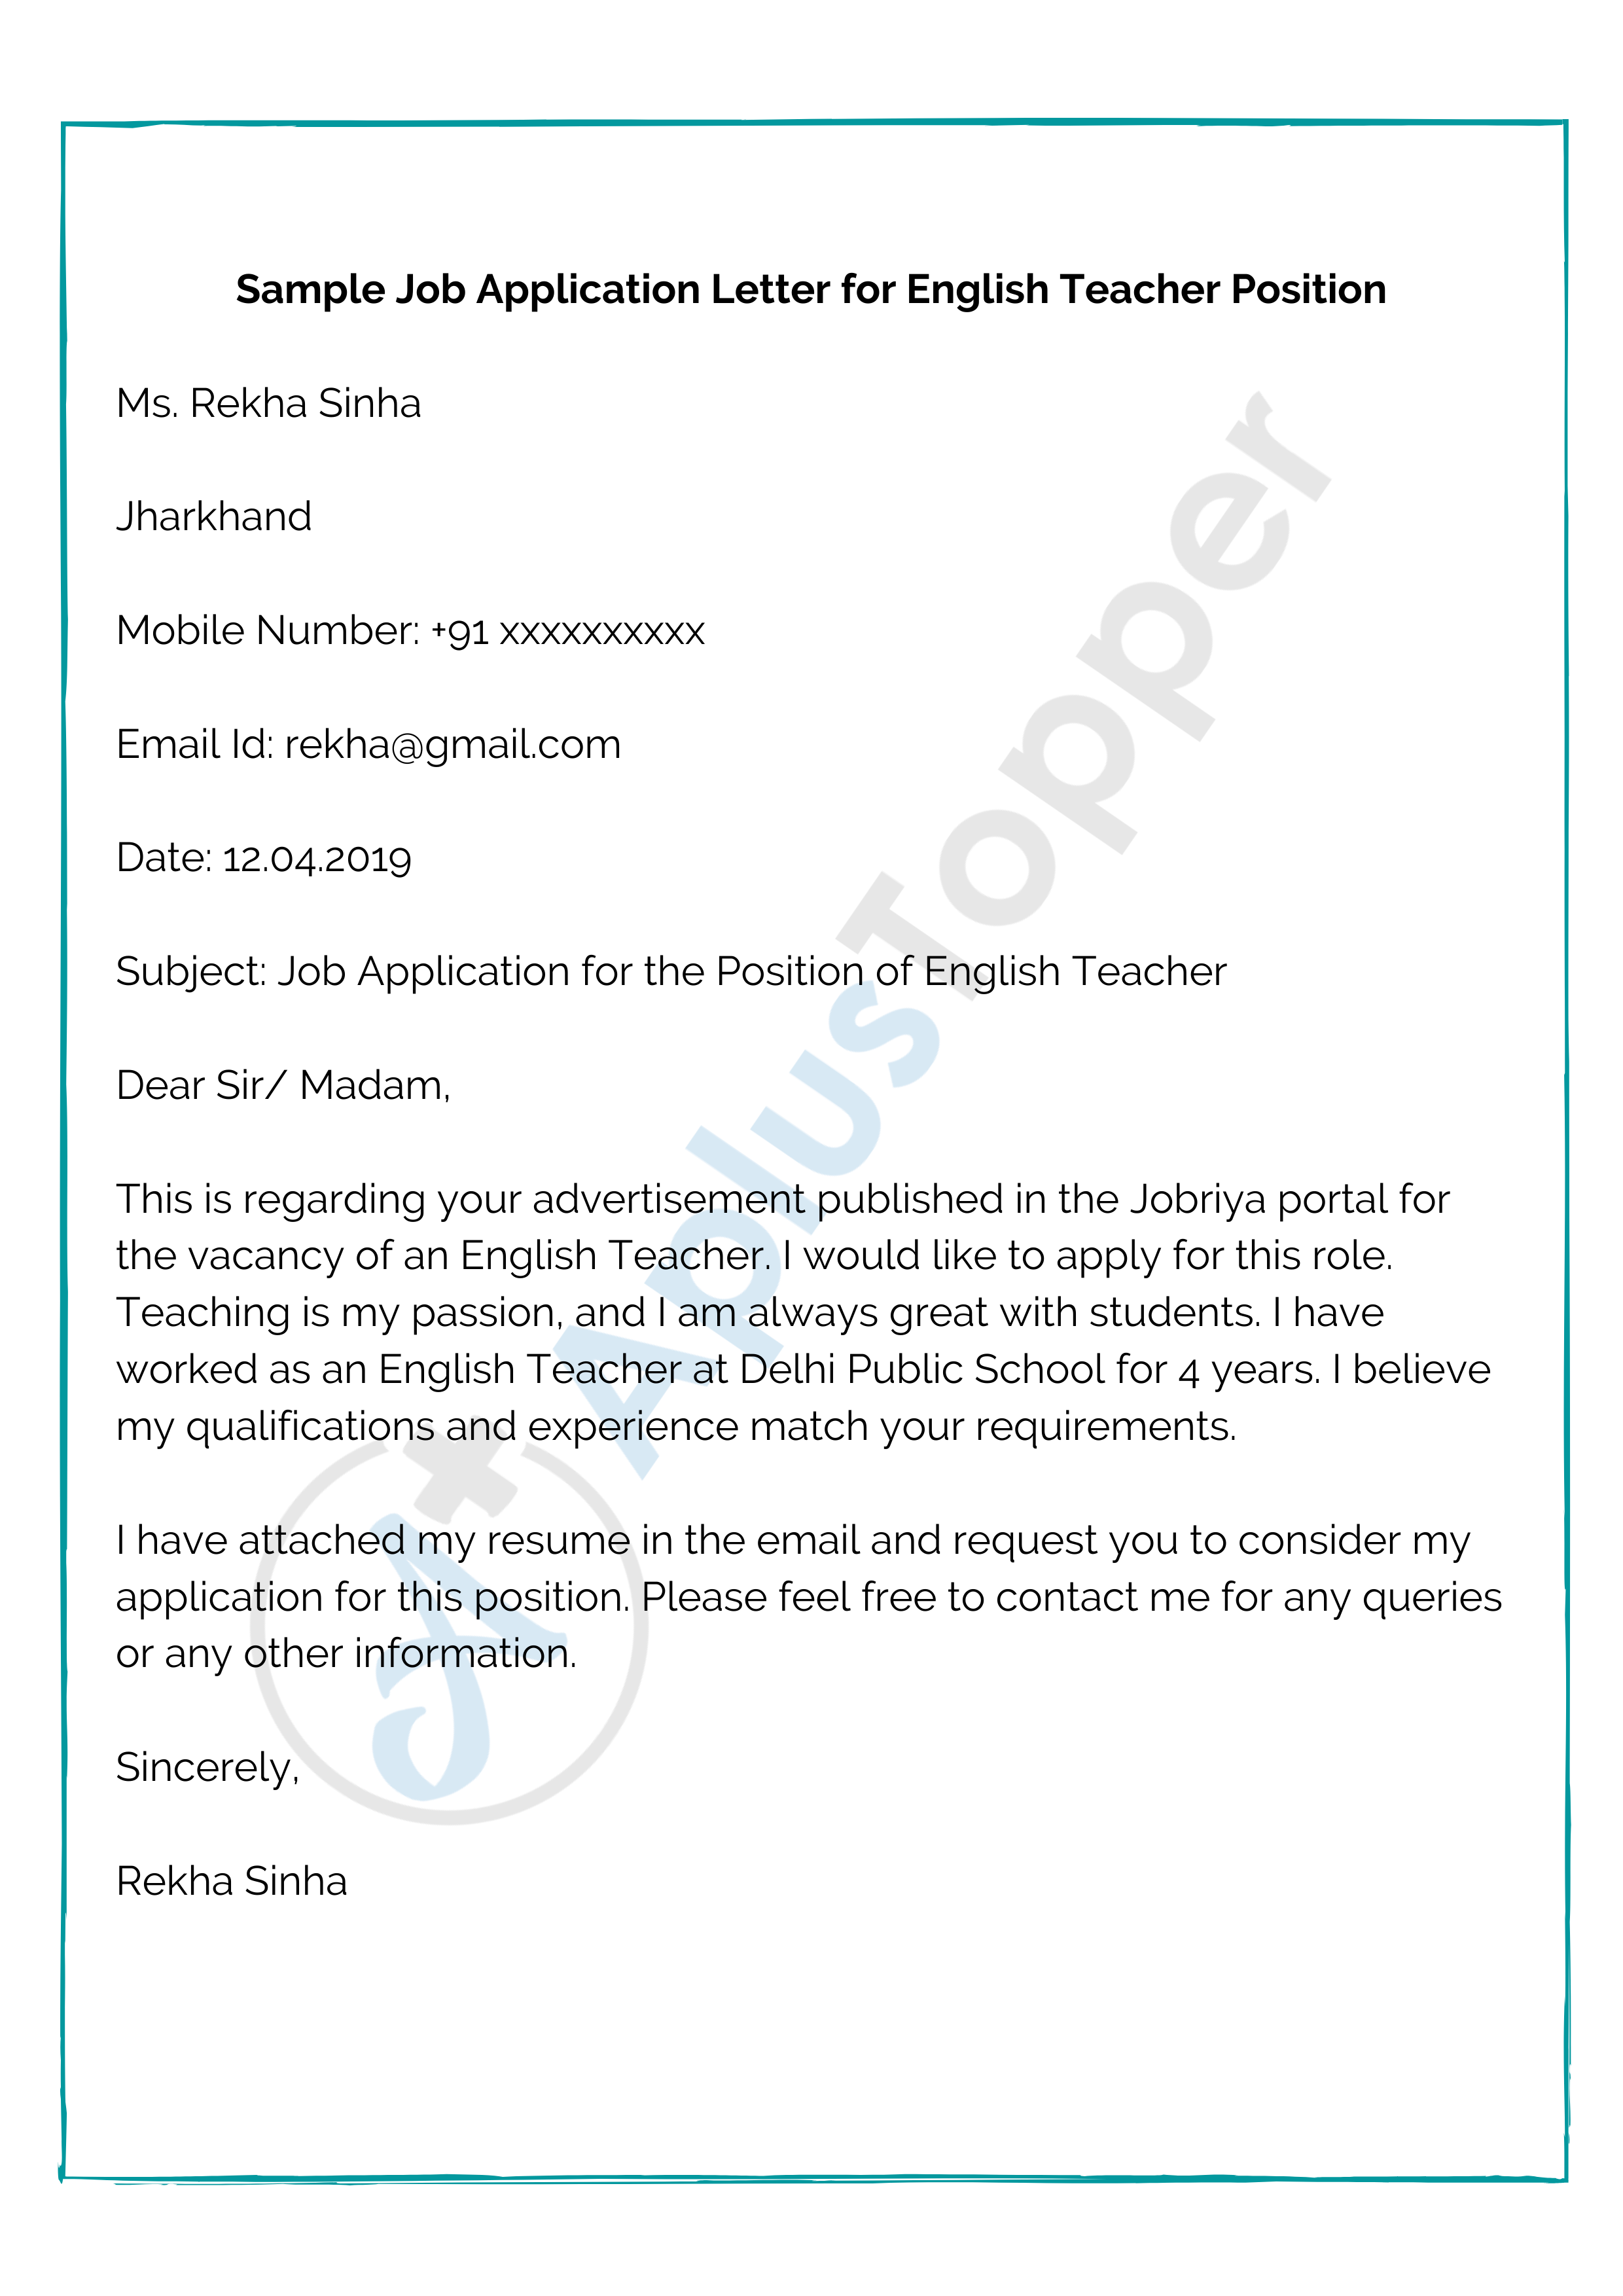 how to write an application letter on teaching job